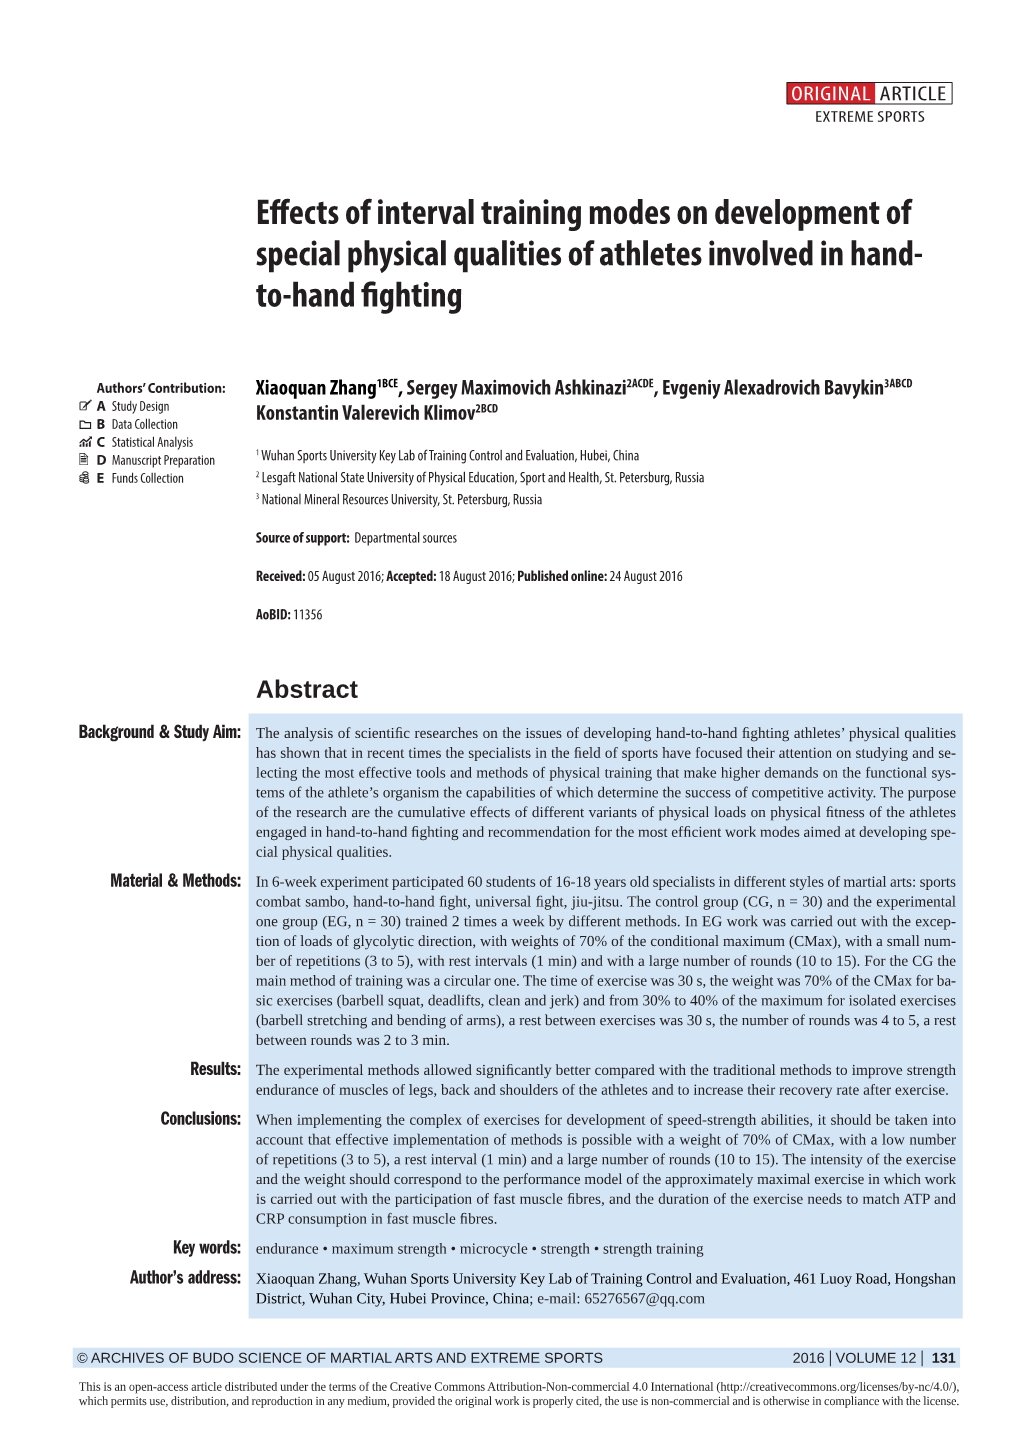 Effects of Interval Training Modes on Development of Special Physical Qualities of Athletes Involved in Hand- To-Hand Fighting